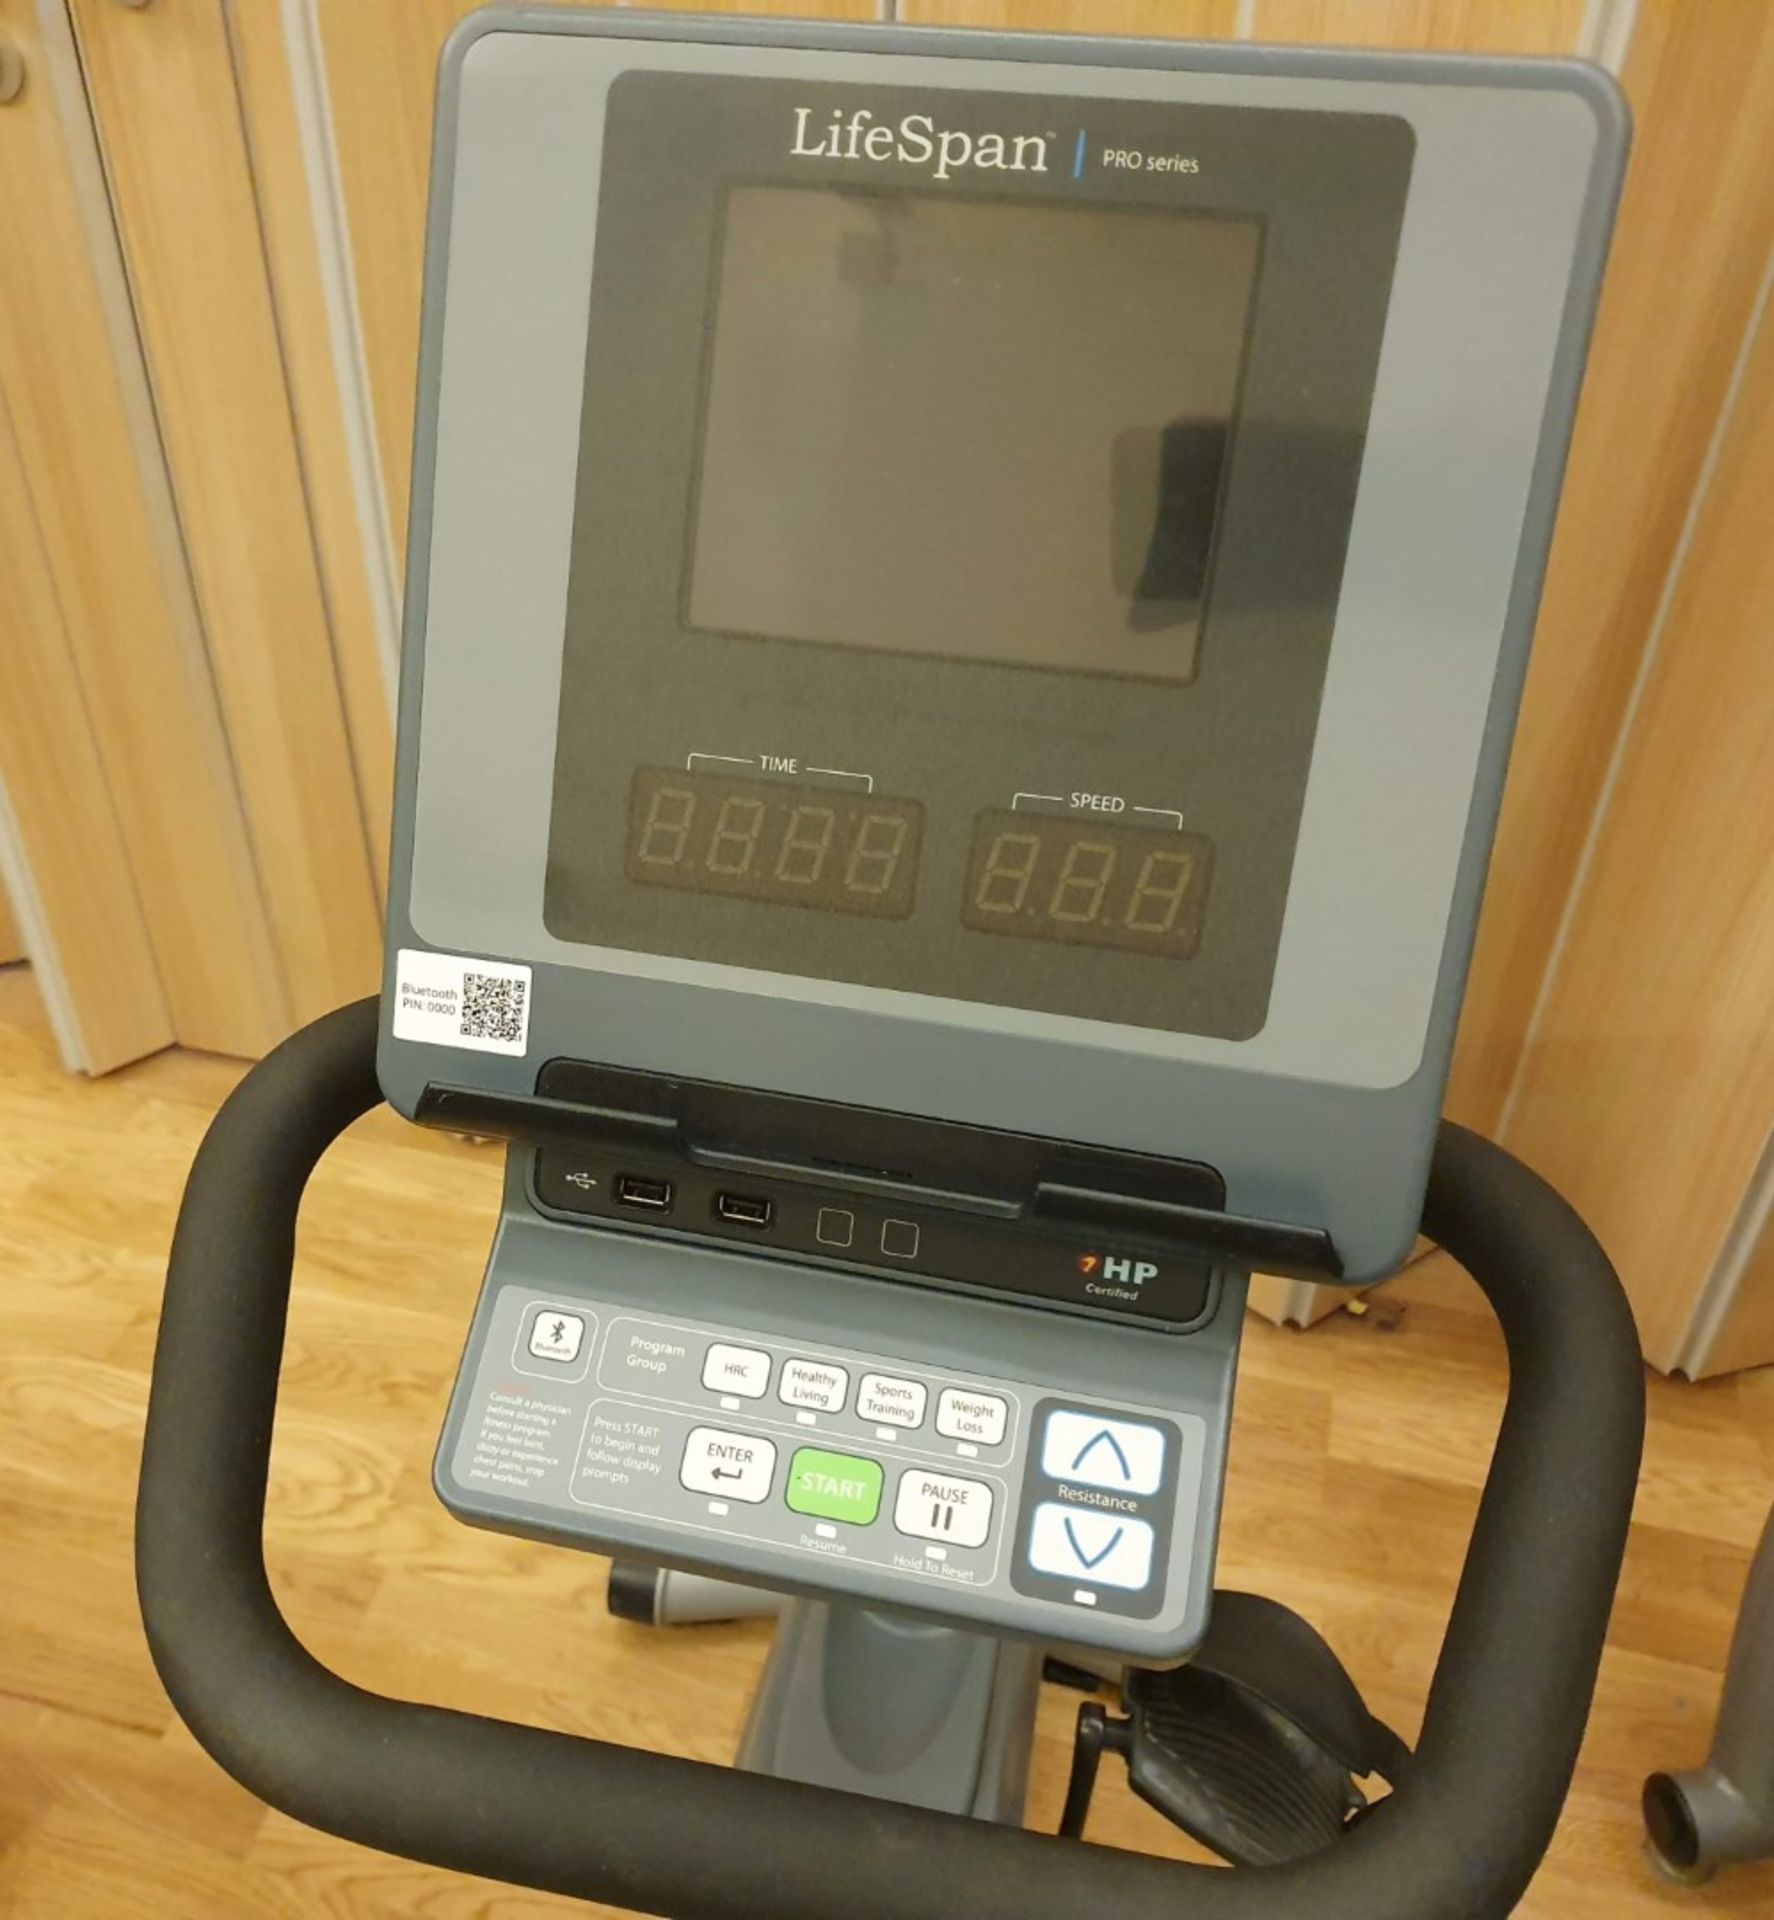 1 x Lifespan R7000 Pro Series Excercise Bike With USB Connectivity - Approx RRP £1,500 - CL552 - - Image 3 of 6